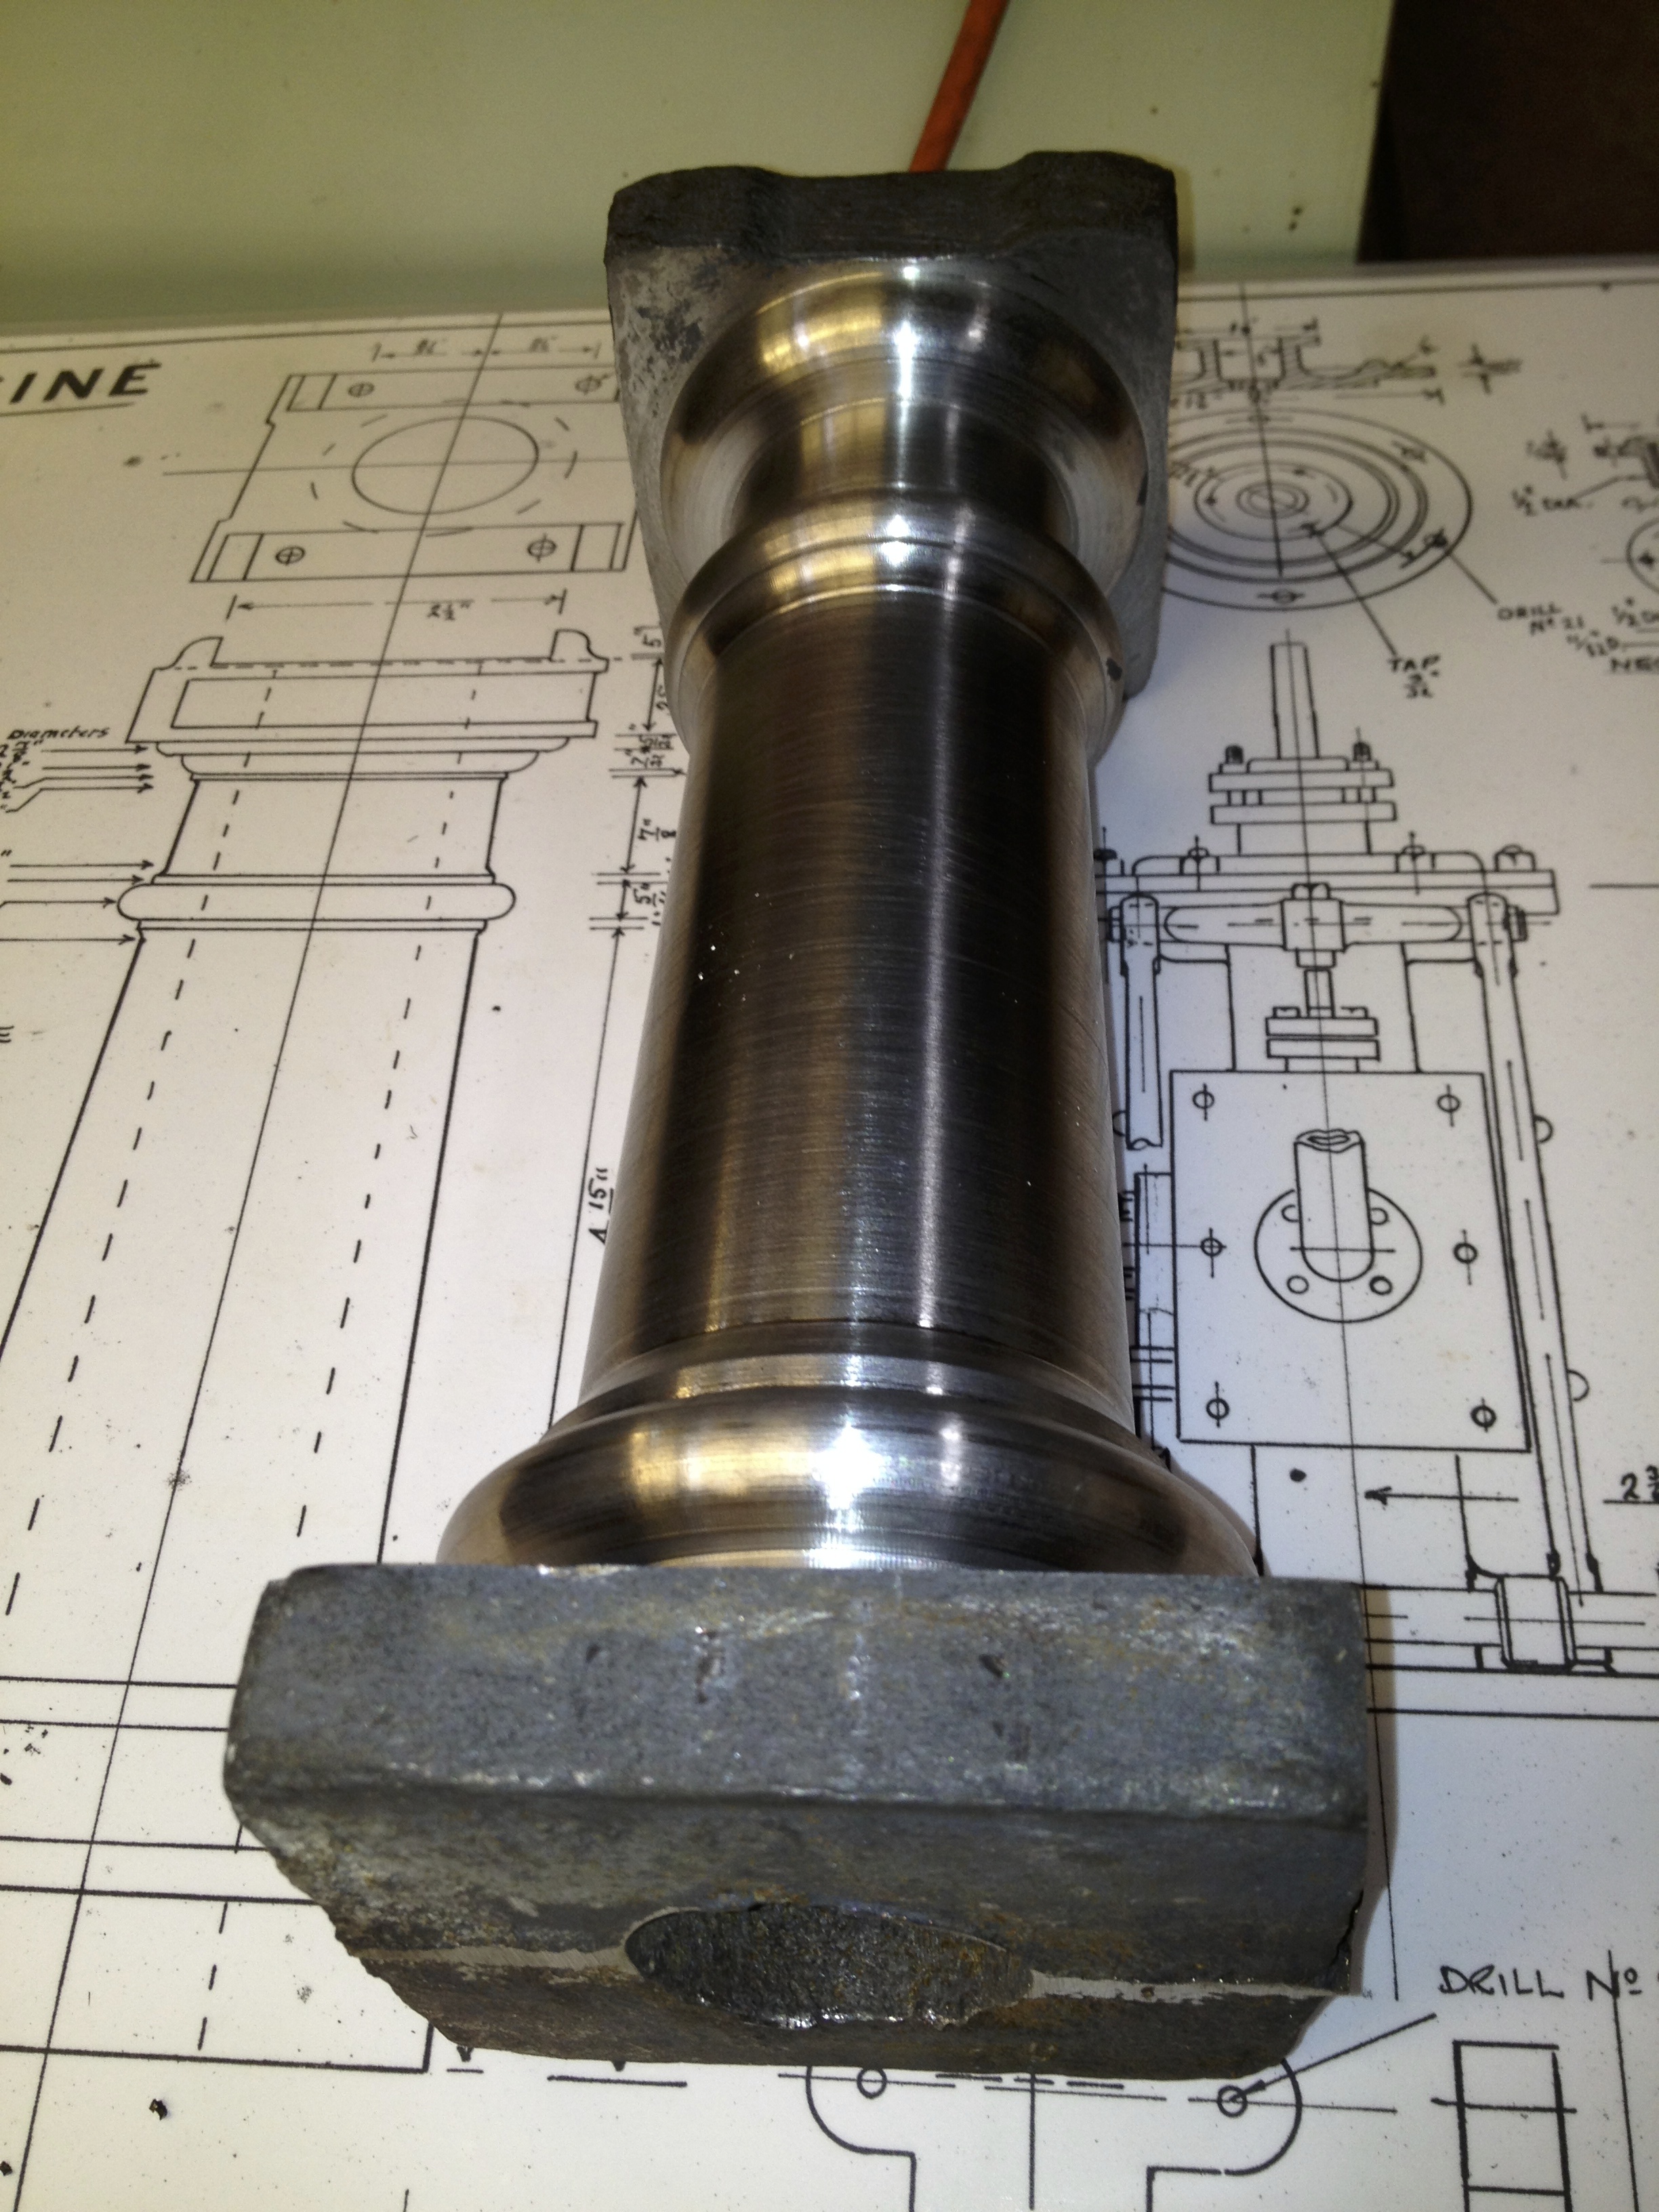 Beam Engine Column after turning, before plating